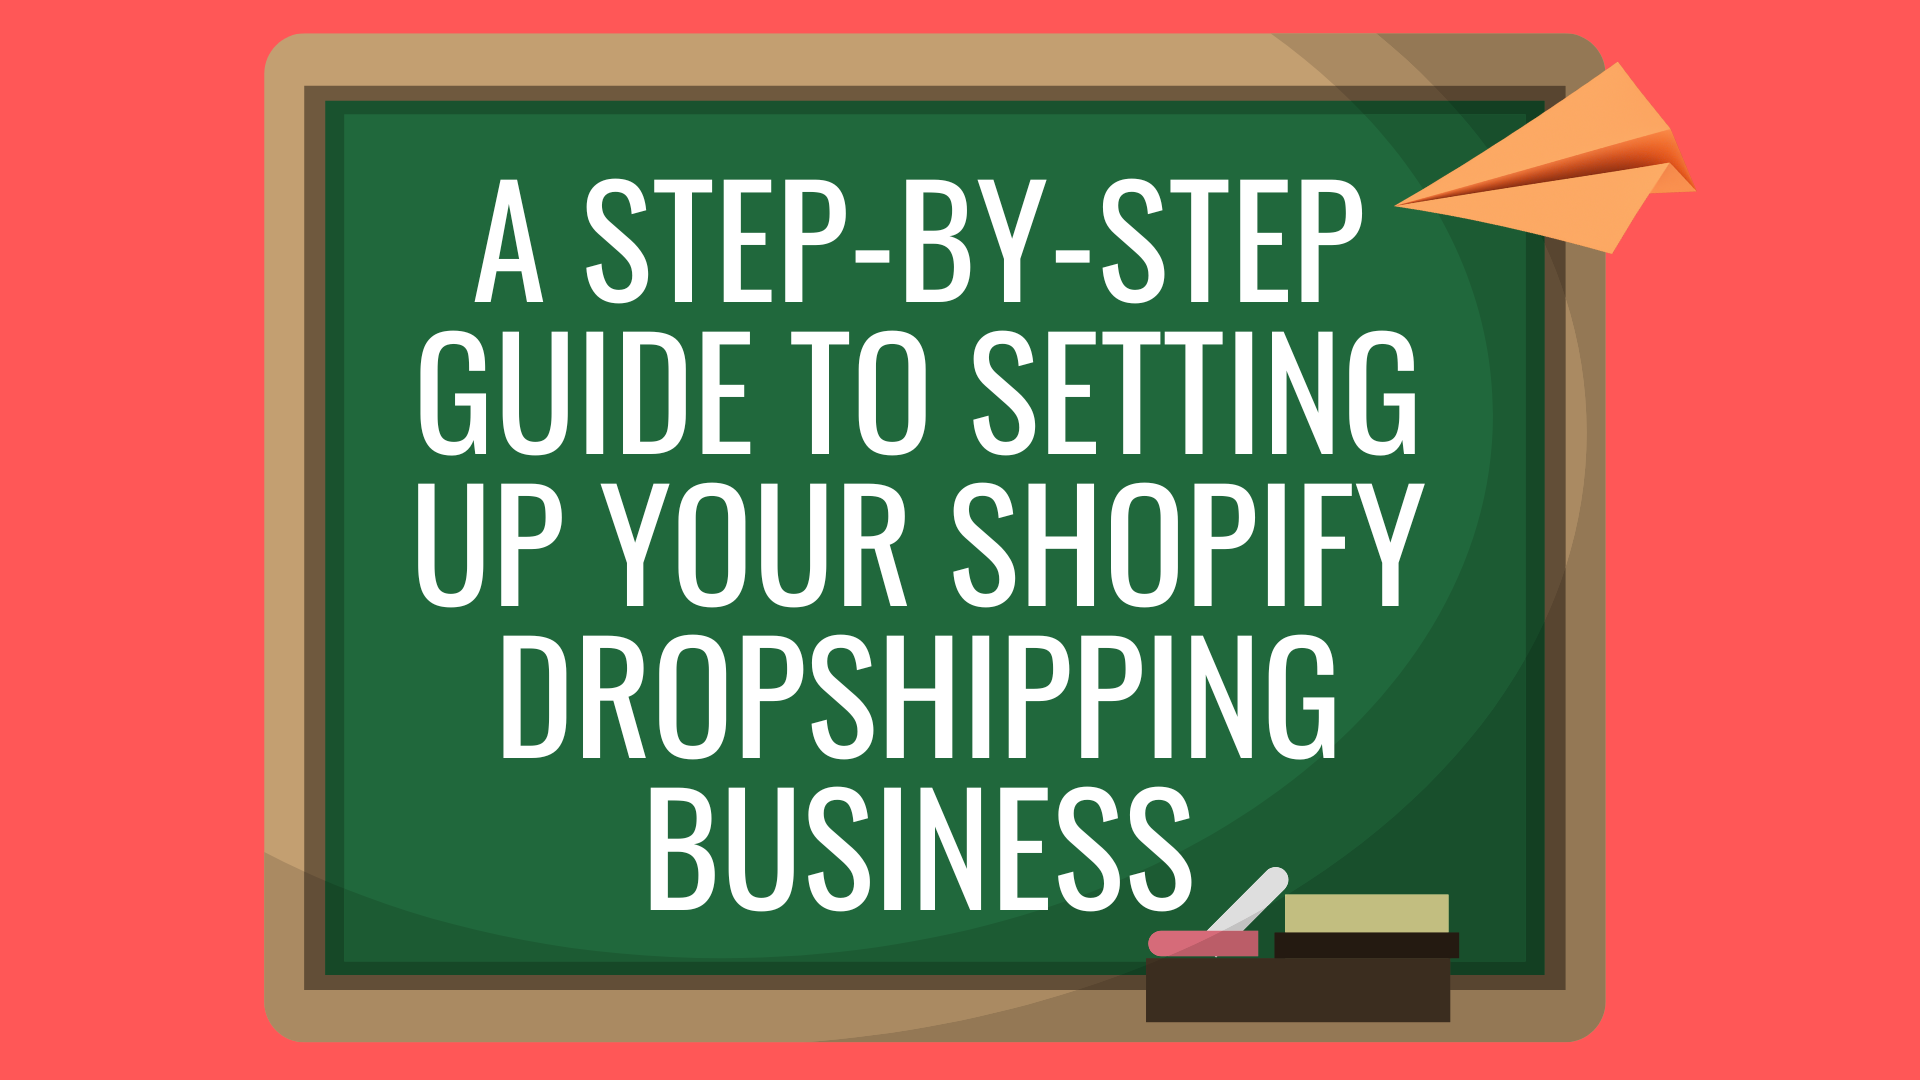 A Step by Step Guide to Setting Up Your Shopify Dropshipping Business